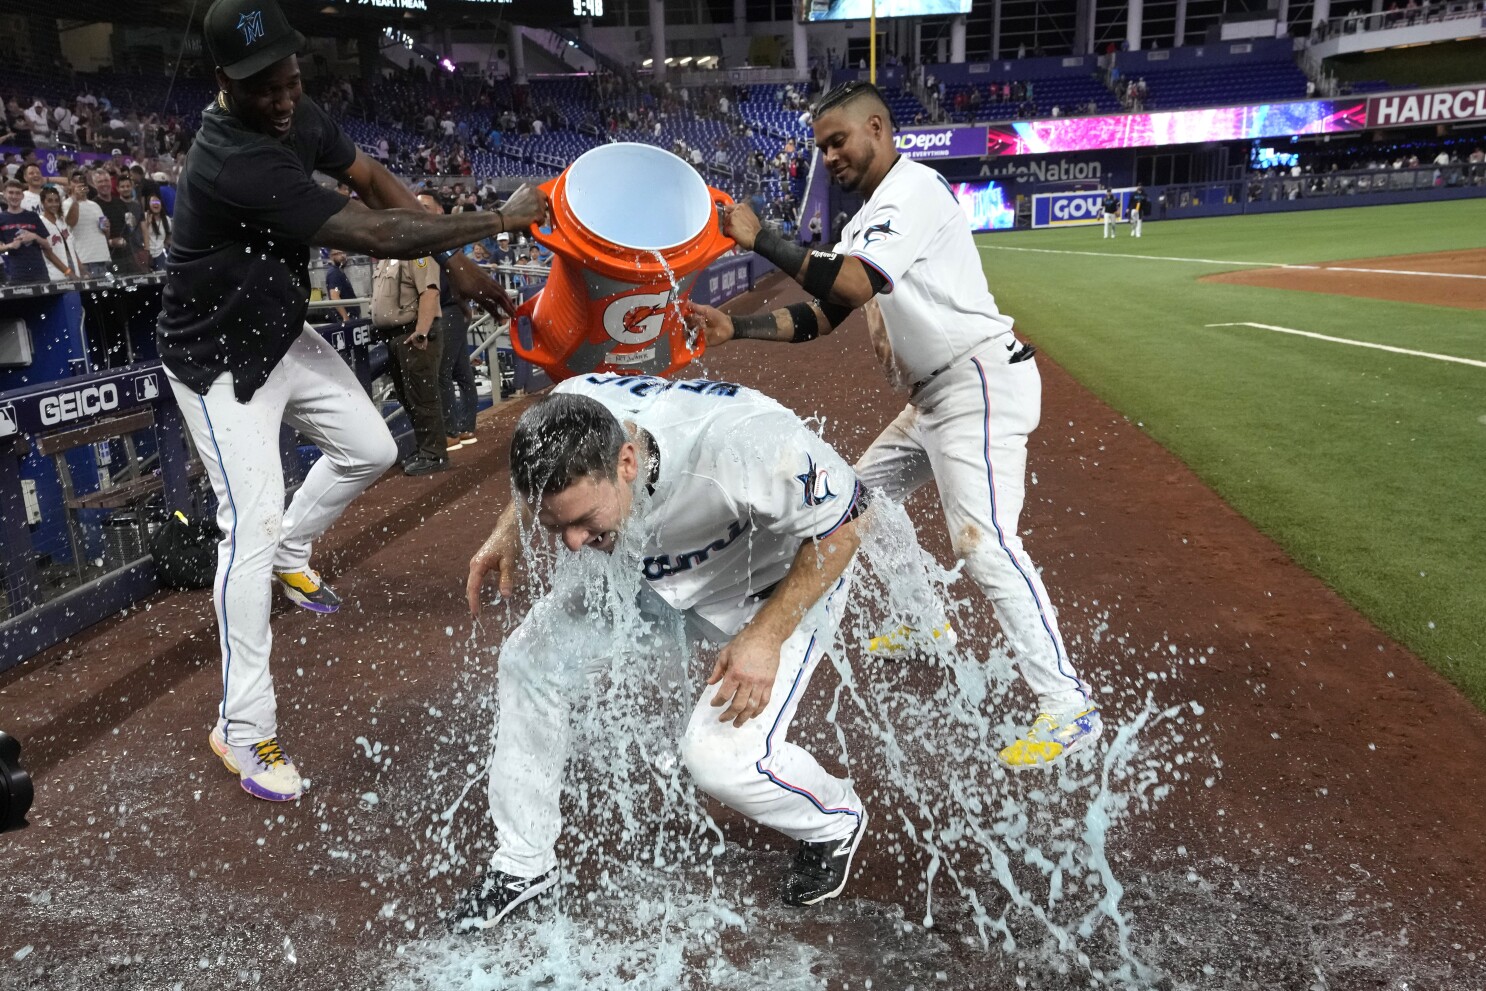 Arenado's 2-run HR in 9th gives Cards win over Marlins